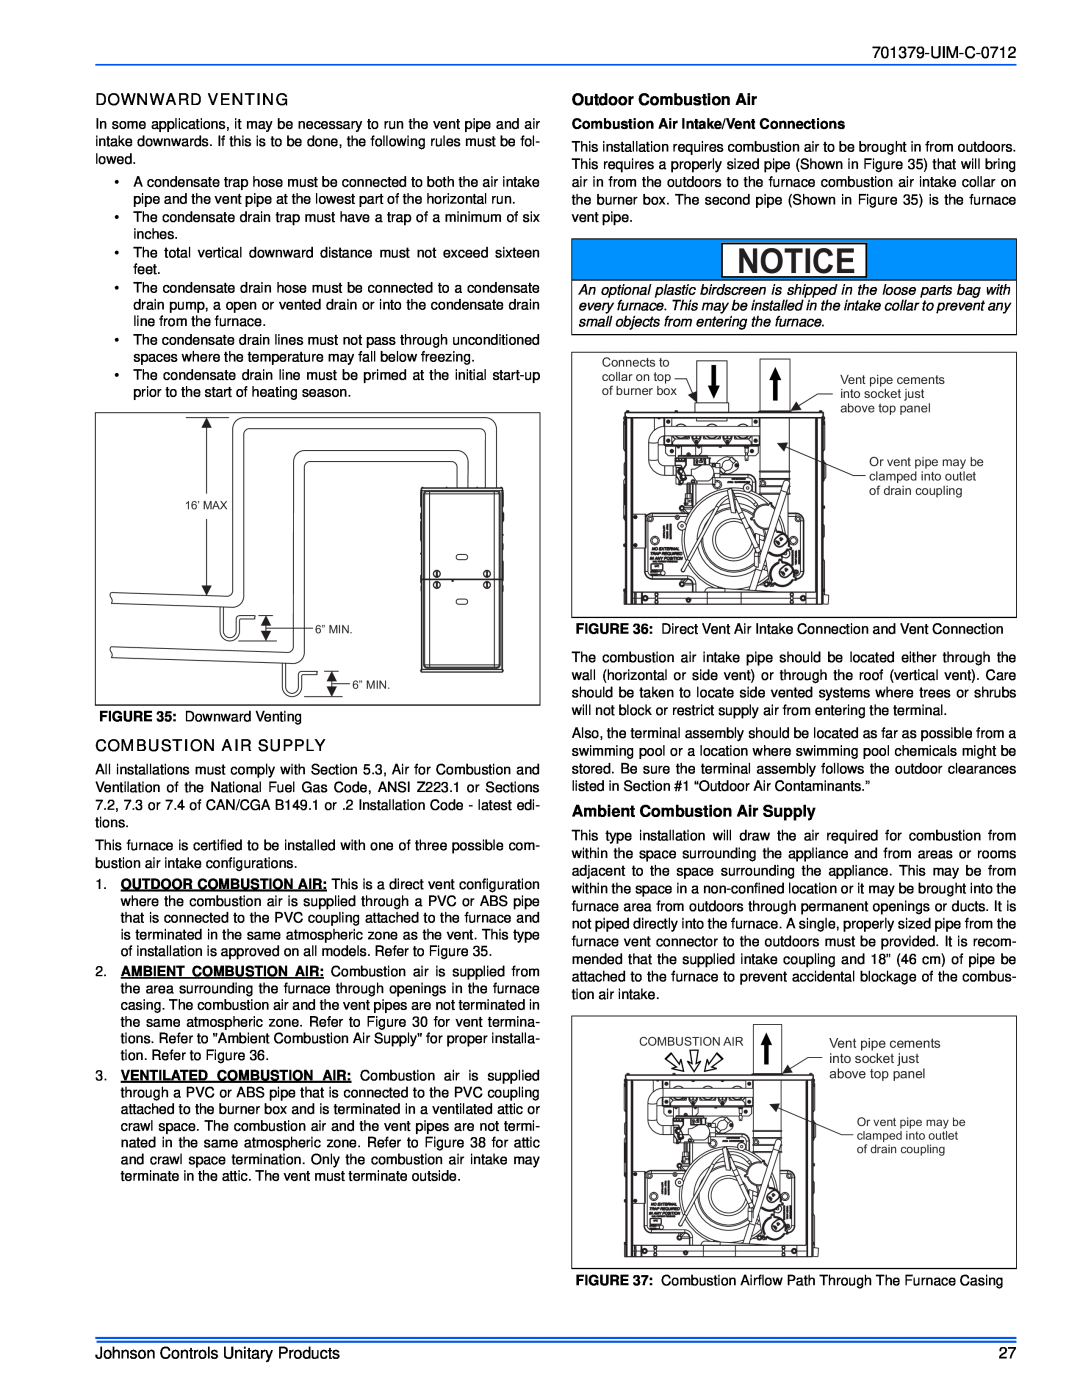 Johnson Controls TM9V*MP installation manual UIM-C-0712, Downward Venting, Outdoor Combustion Air, Combustion Air Supply 